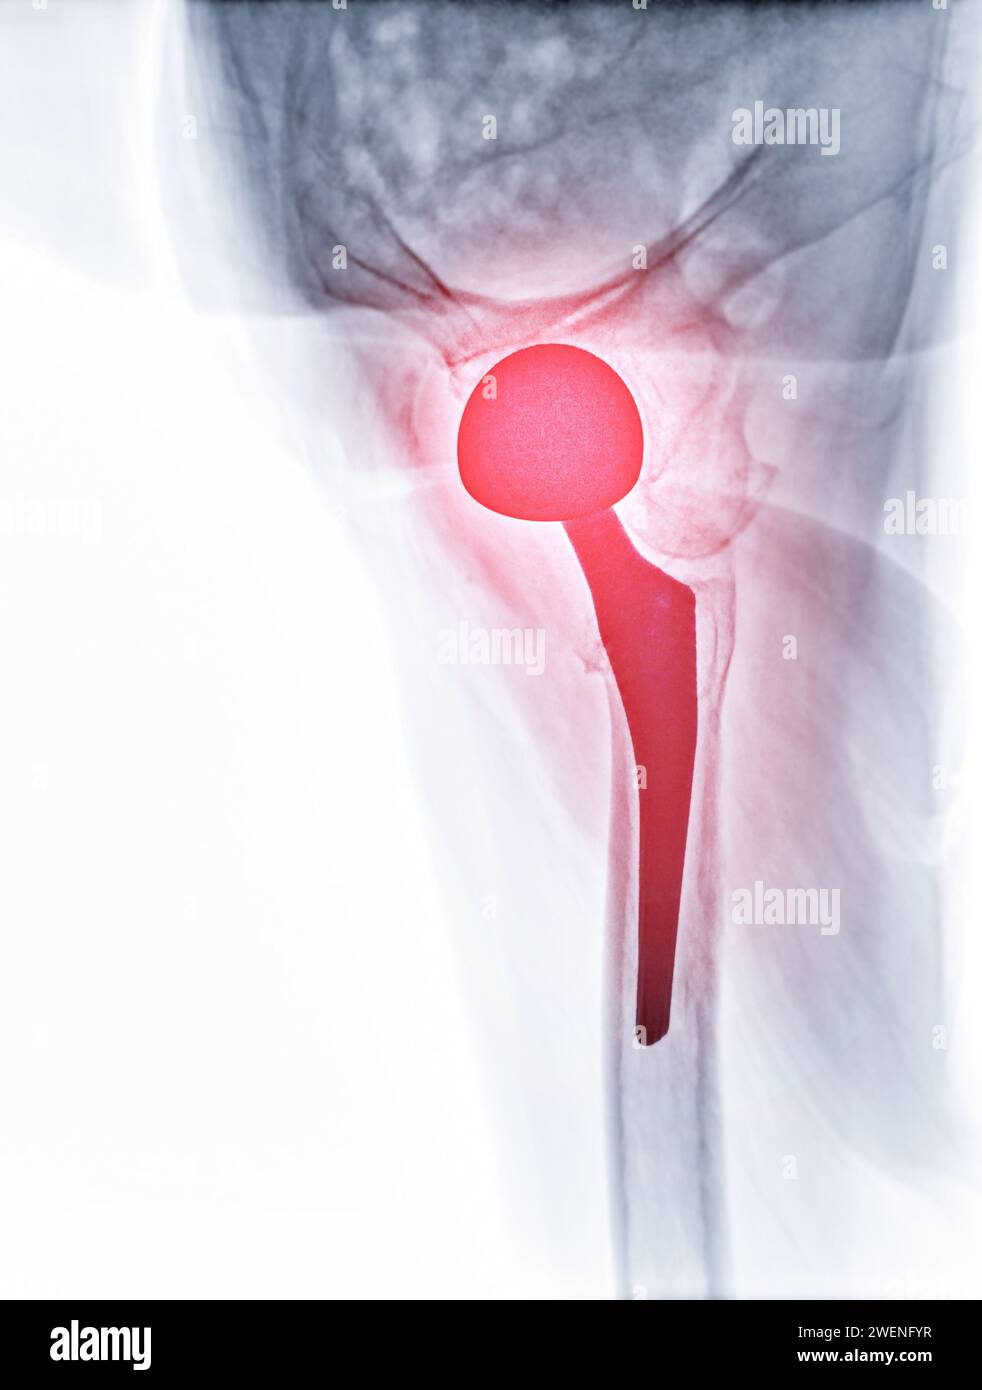 An X-ray reveals both hip joints with TOTAL HIP ARTHROPLASTY, showcasing the success of the surgical procedure and providing a visual testament to the Stock Photo